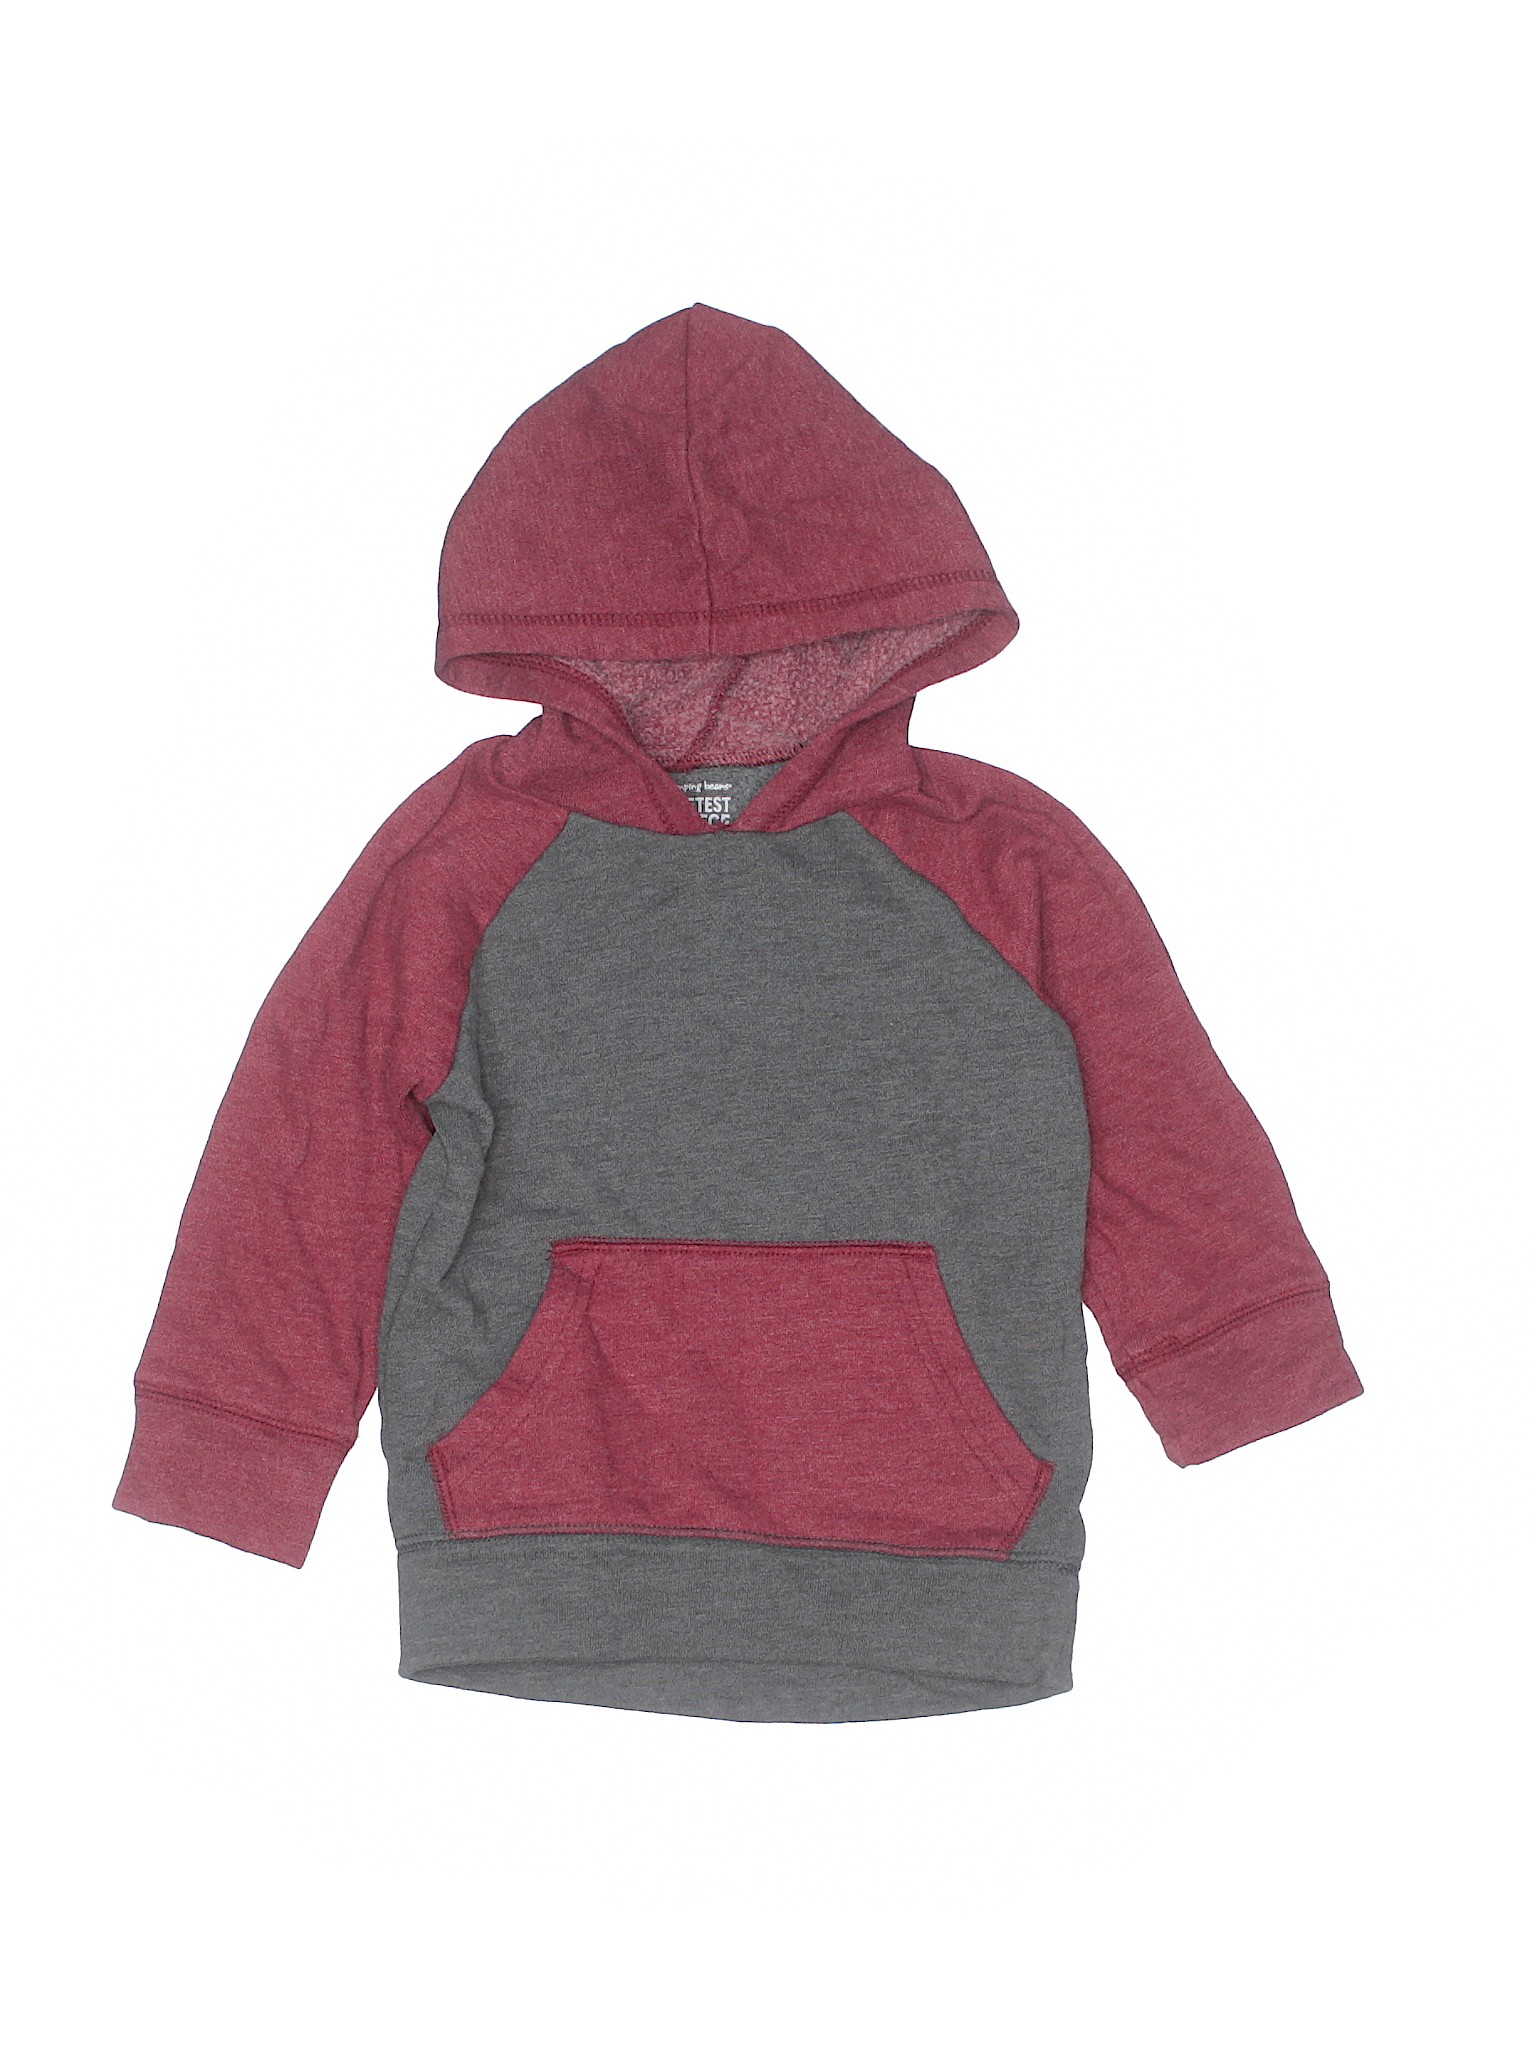 red champion pullover